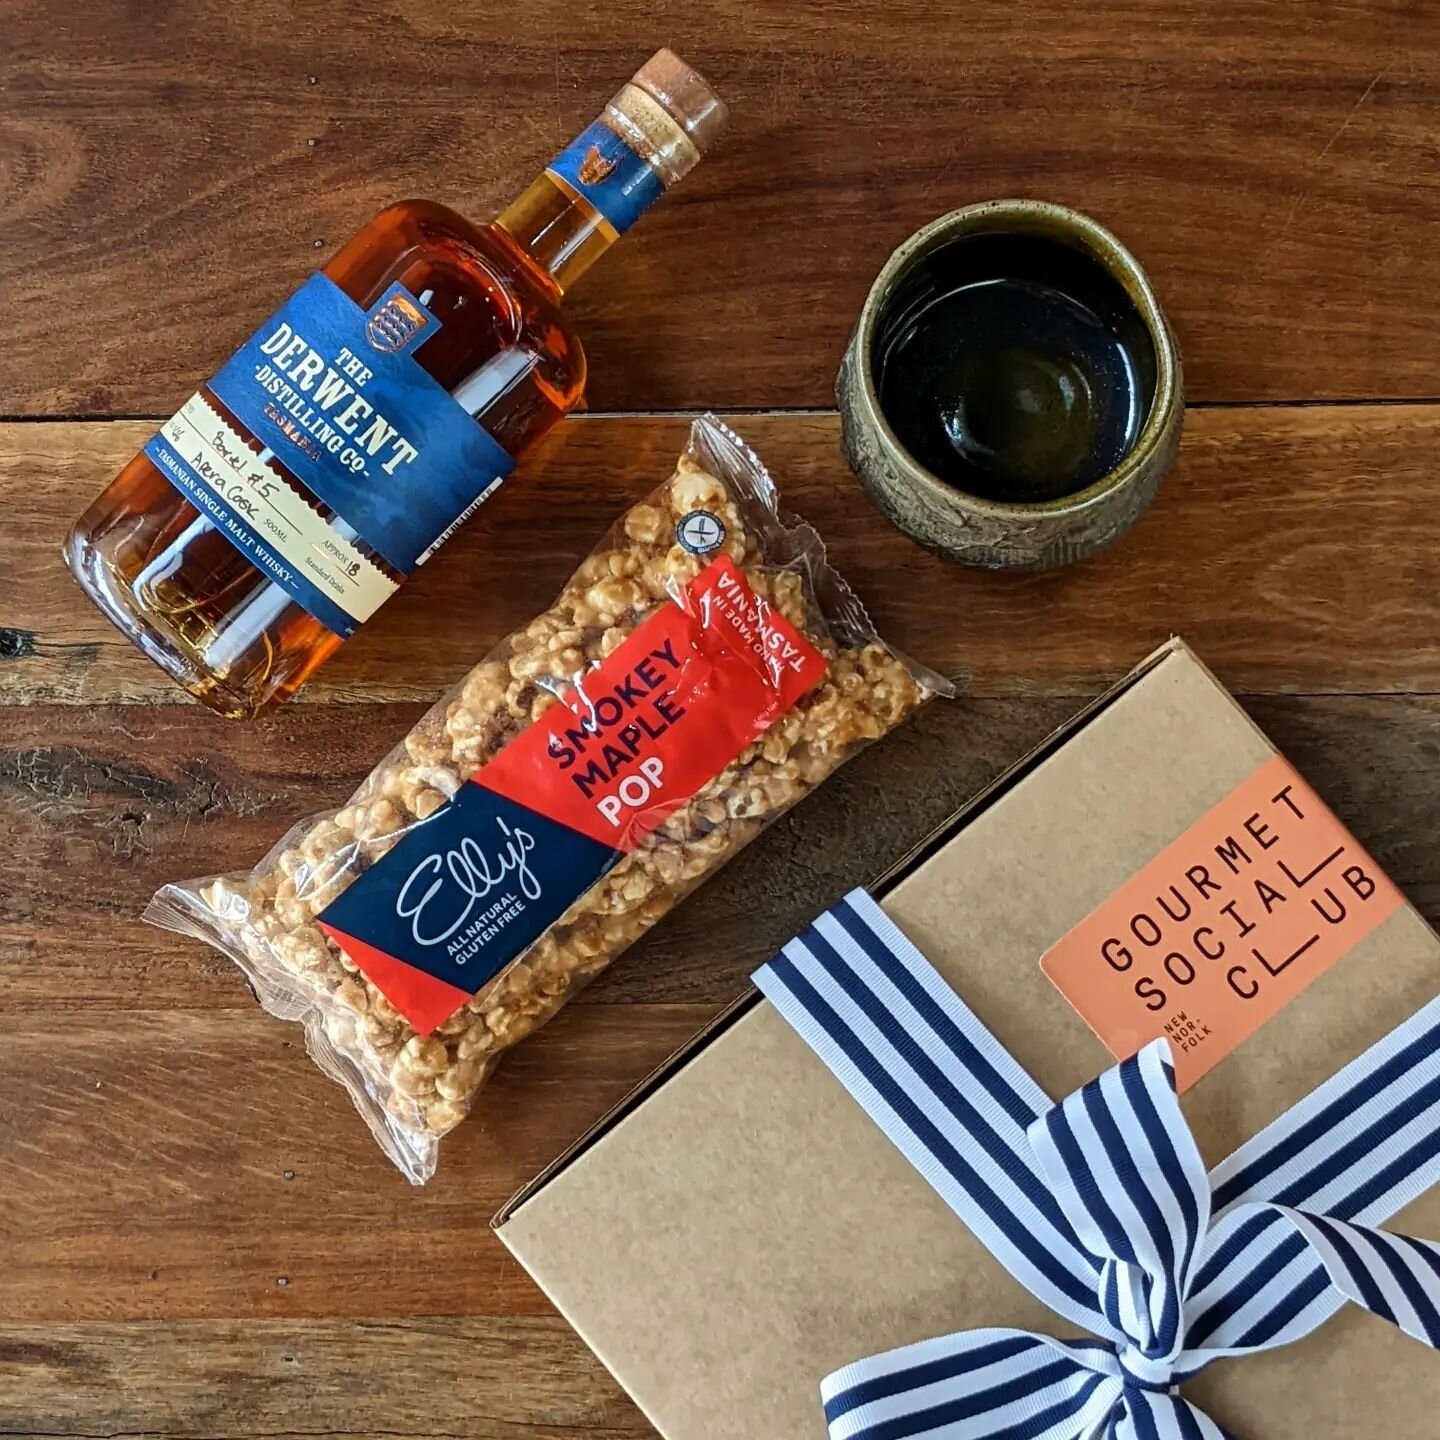 Treats for dads!💙 Show a pop how much you appreciate him with a gift box of goodies. 

The Tasmanian Winter Warmer (pictured here) features -
🥃 @derwentdistillery 's sought after Barrel #5 Single Malt Whisky, 
🍵A handcrafted ceramic cup by Derwent